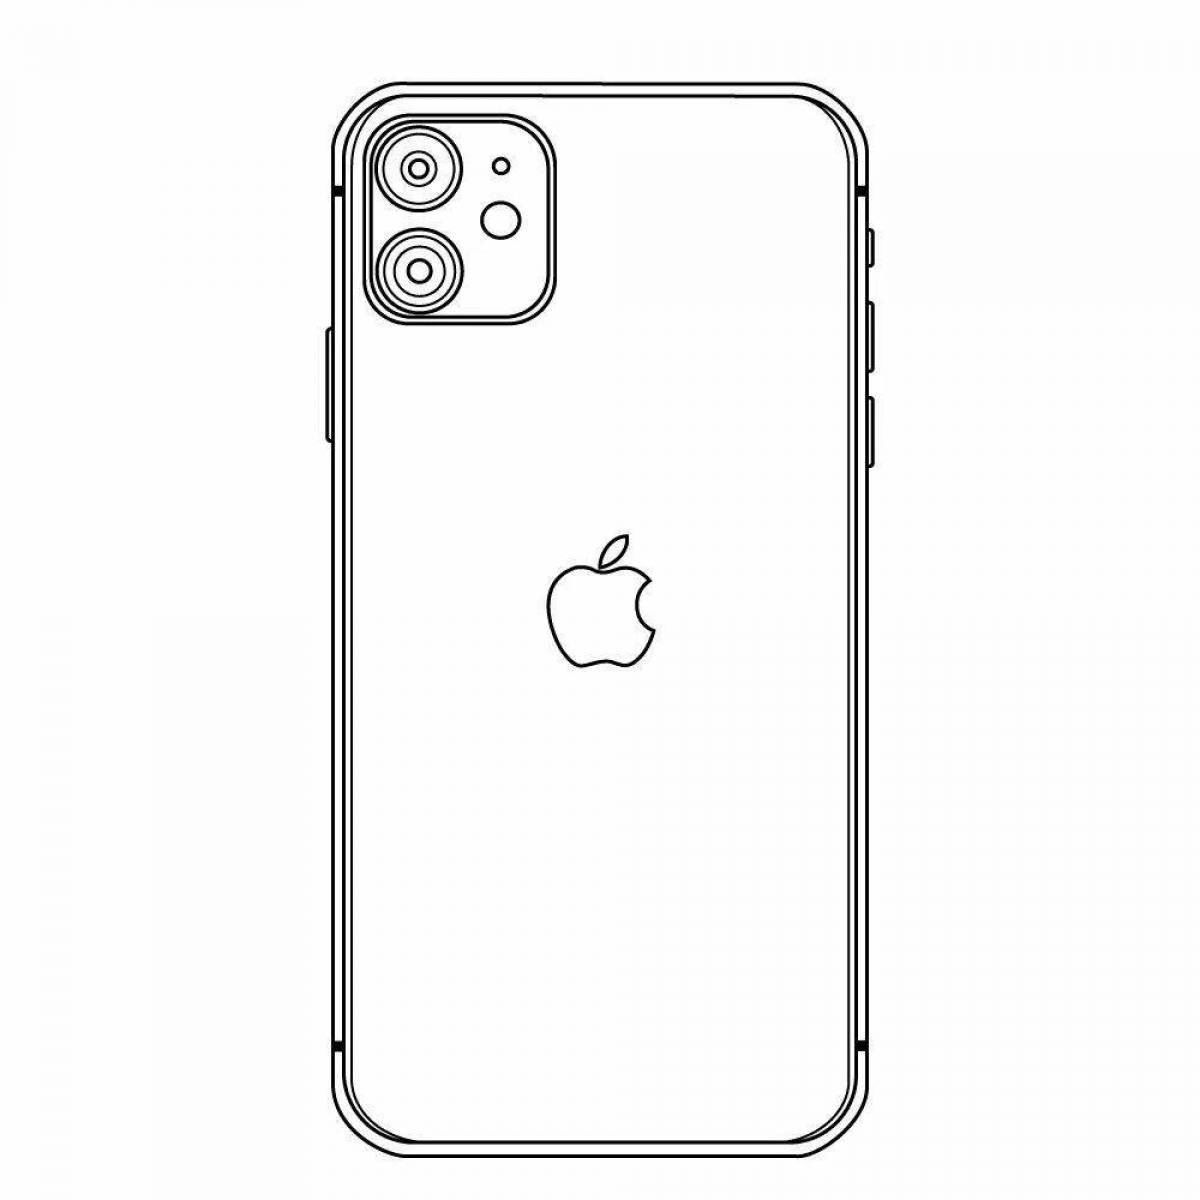 Creative iphone coloring book